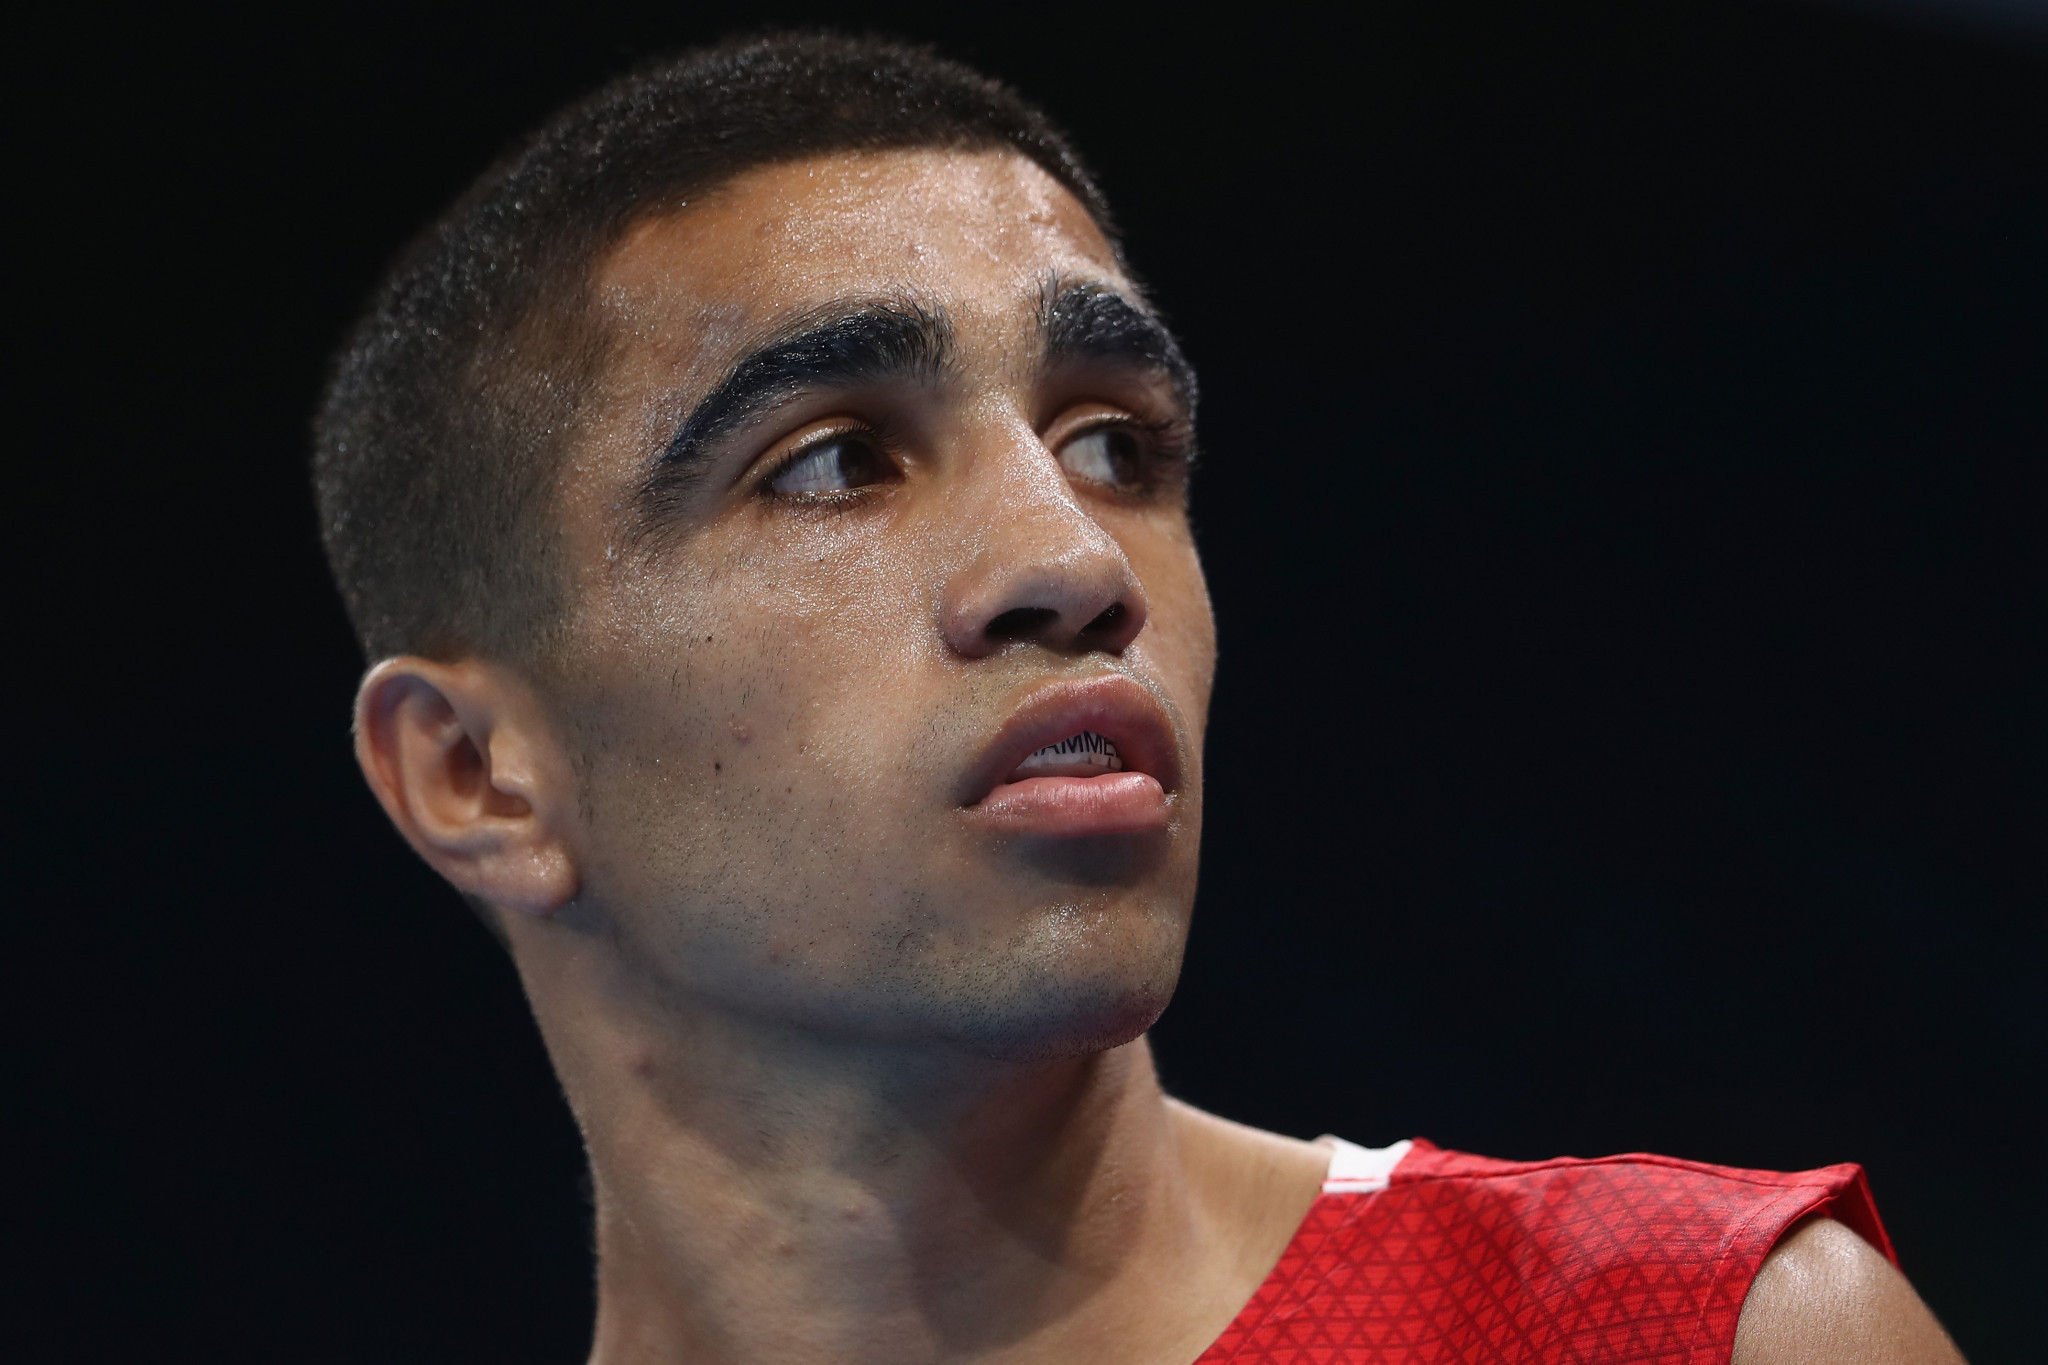 English boxer Ali suspended by AIBA for failed drugs test